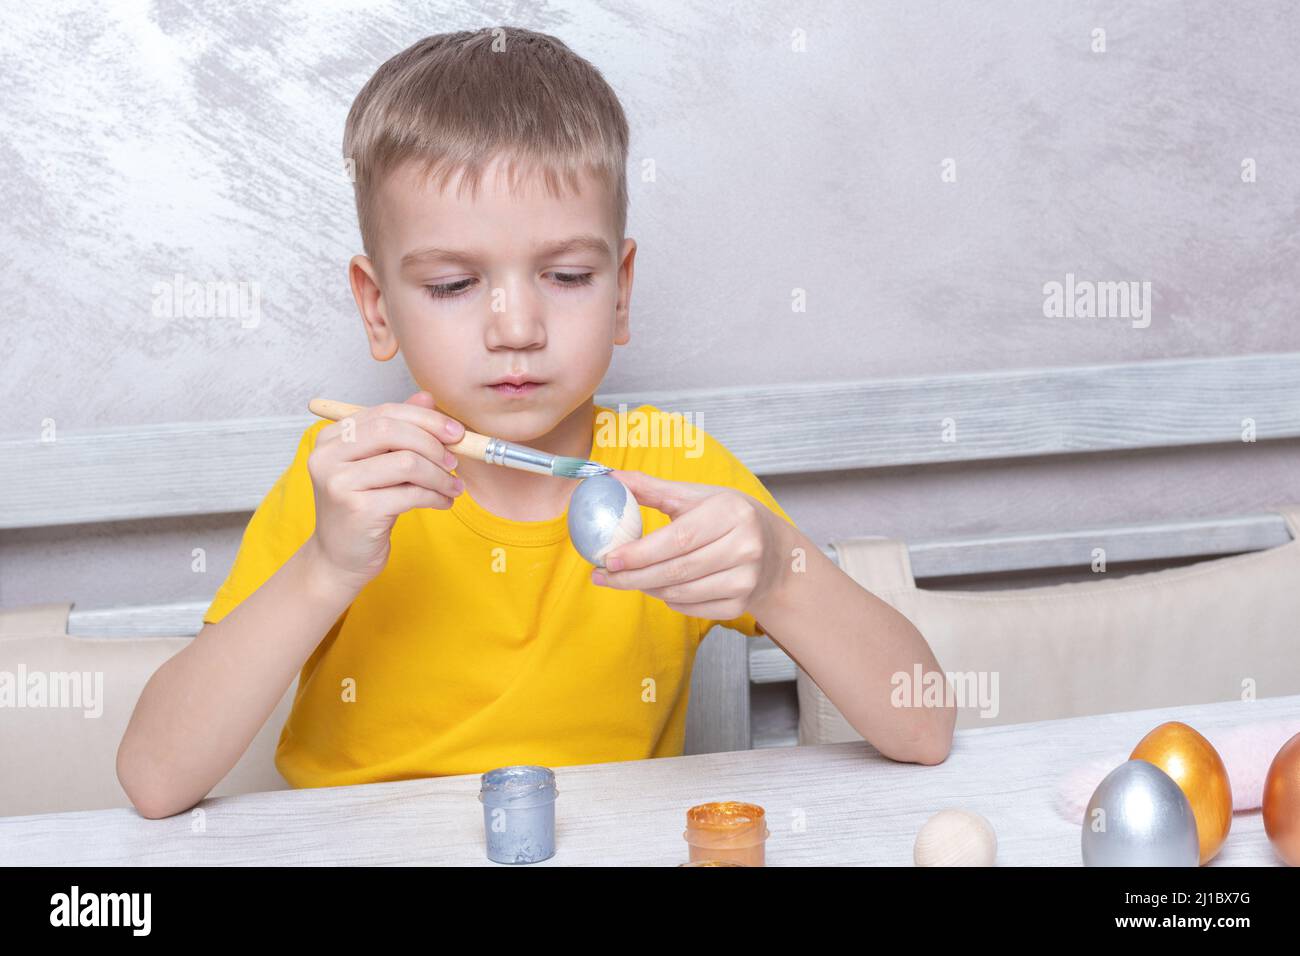 A little blond boy paints eggs for the Easter holiday in the home kitchen. The child has fun and celebrates the holiday. DIY Easter eggs concept. Stock Photo